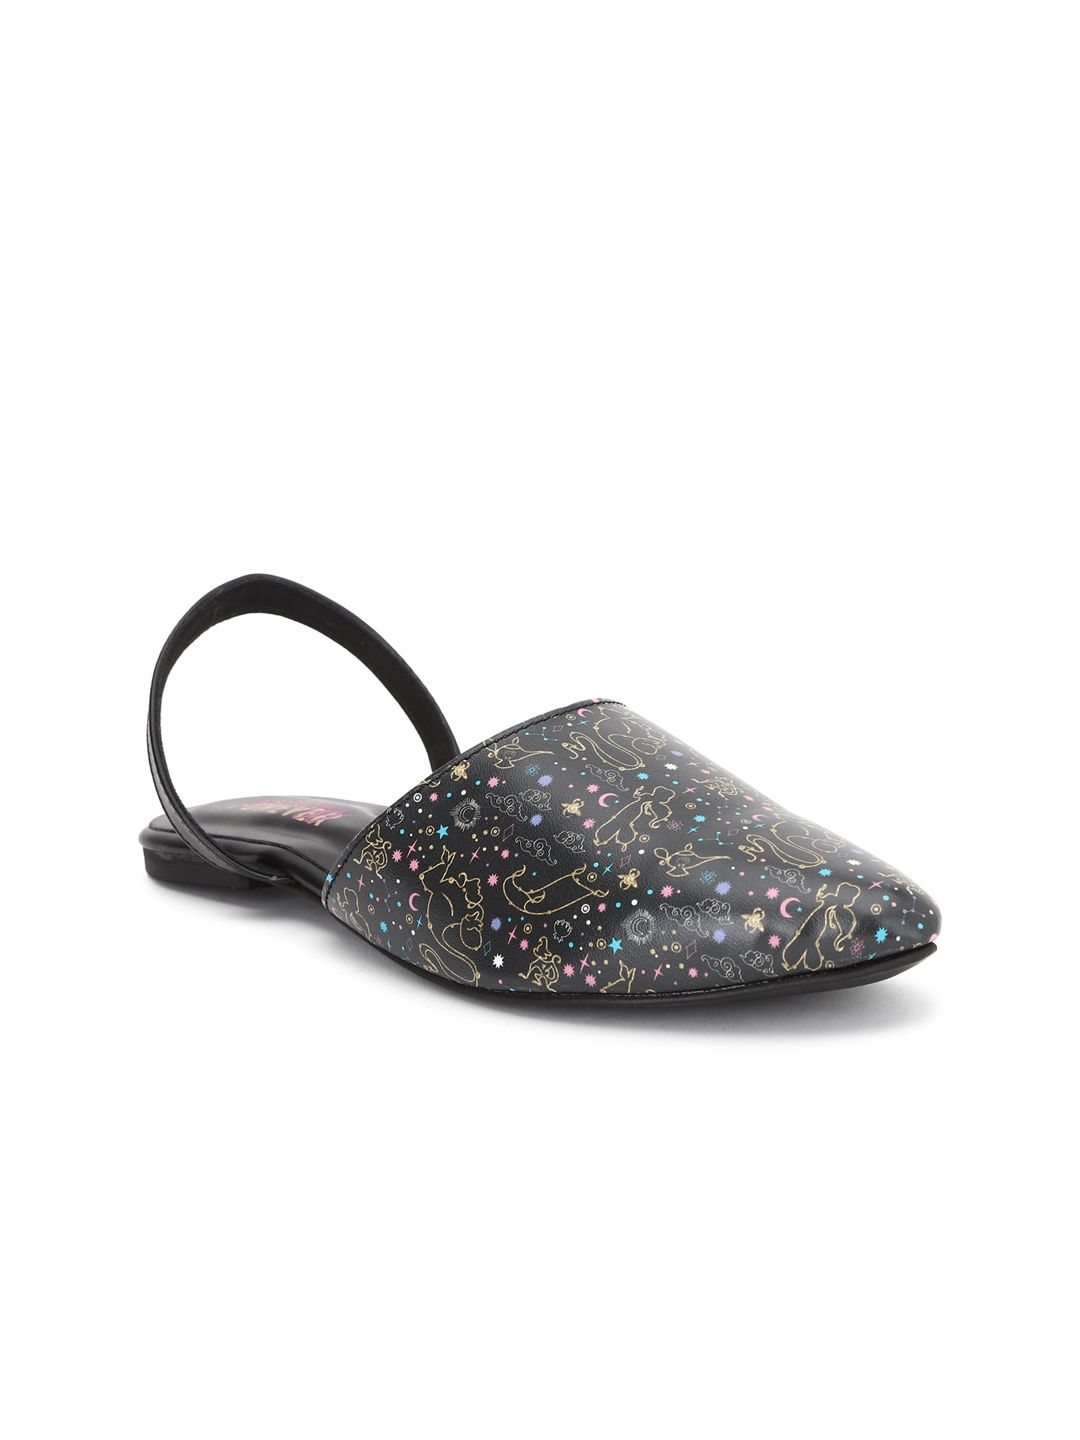 FOREVER 21 Women Black Printed Mule Flats Price in India